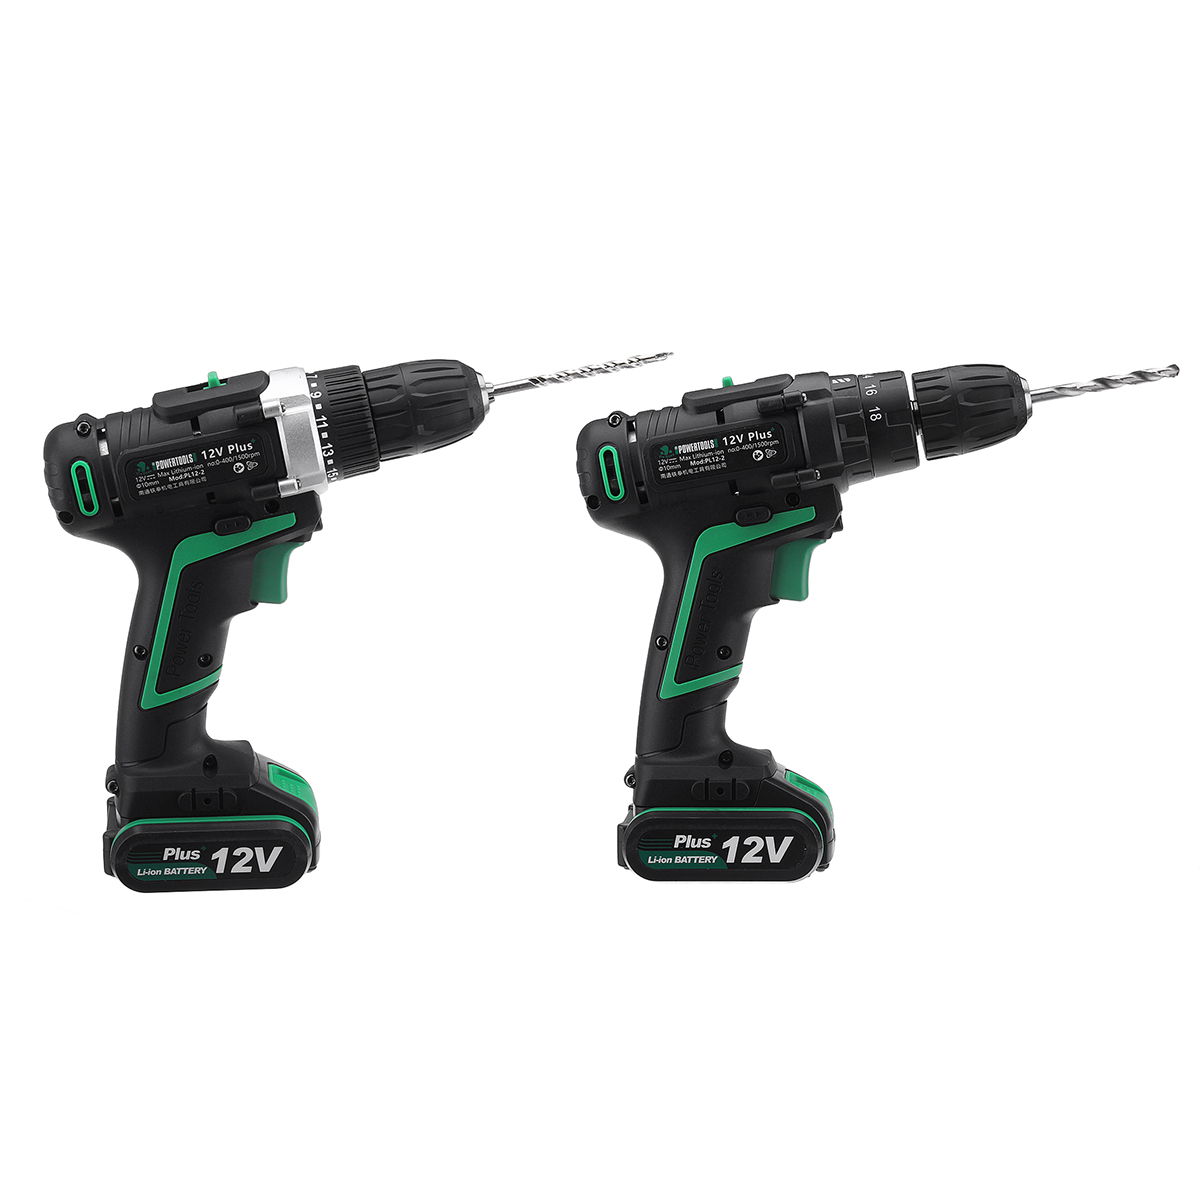 AC100-240V-Electric-Screwdriver-Cordless-Power-Drill-Tools-Dual-Speed-Impact-With-Accessories-1285297-6